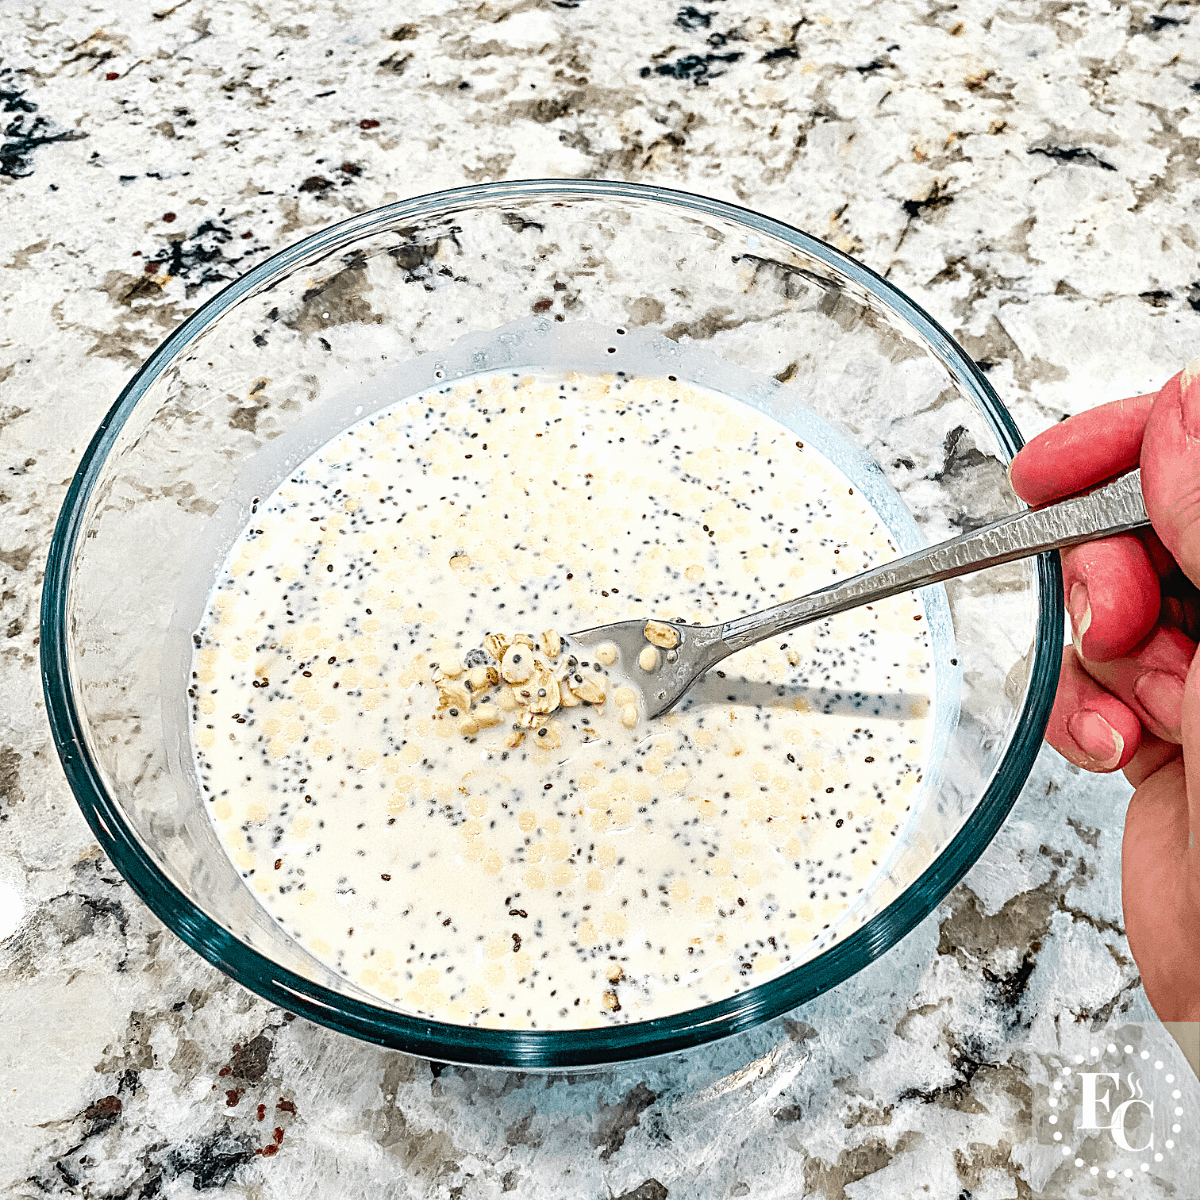 In a glass bowl, mixing the ingredients for overnight oats with a fork.